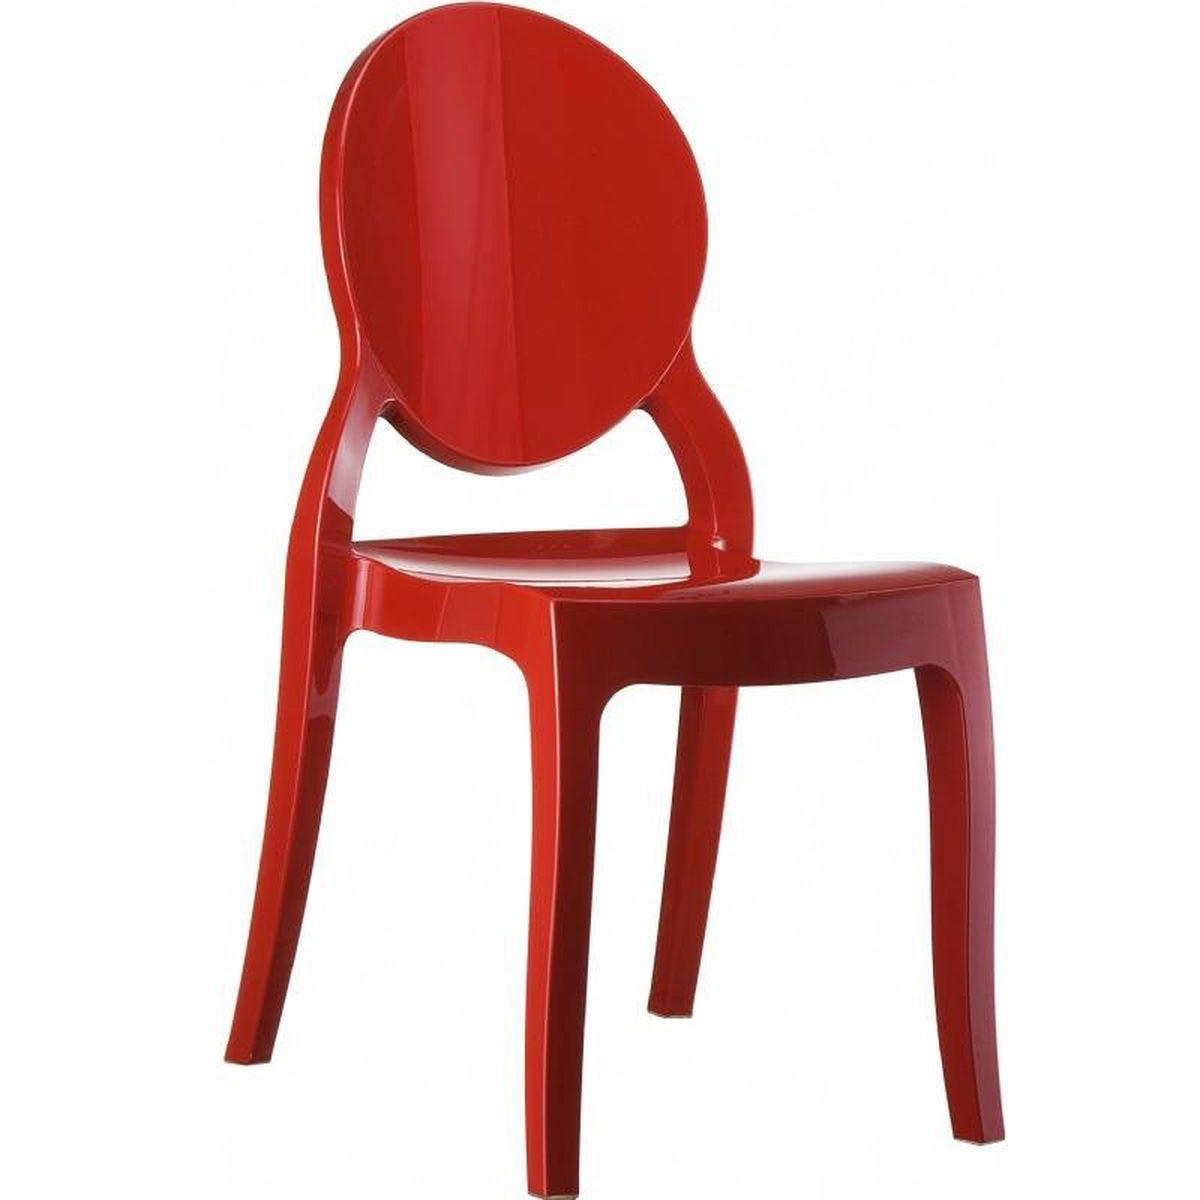 Glossy Red Oval Logo - Red Stacking Dining Chair ISP034-GRED | BestChiavariChairs.com